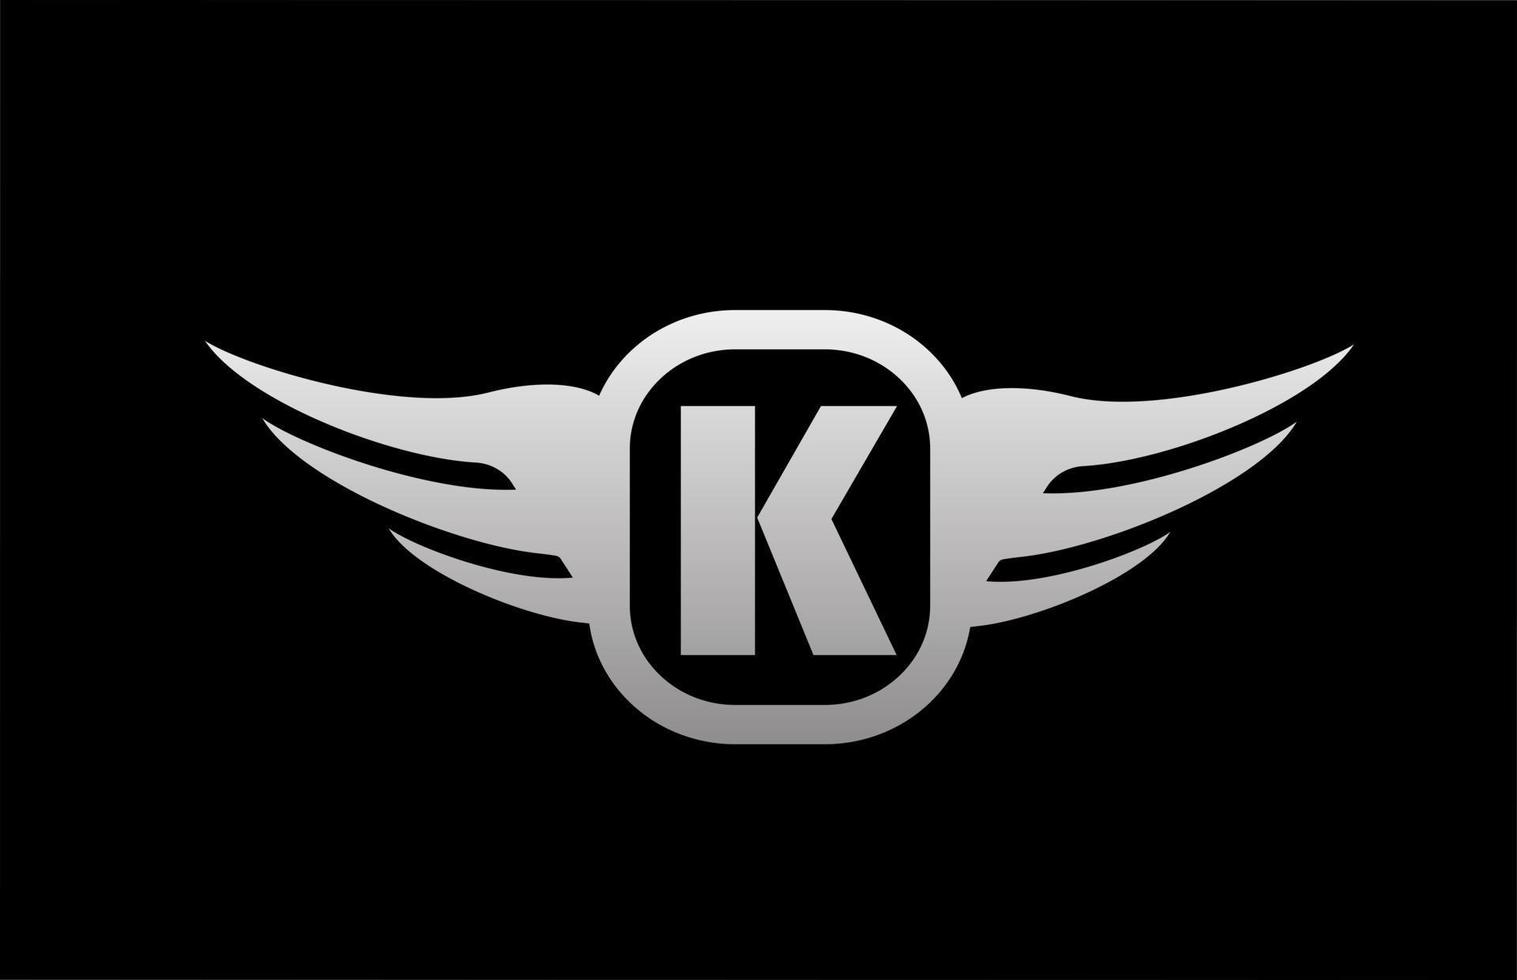 K alphabet letter logo for business and company with wings and black and white grey color. Corporate brading and lettering icon with simple design vector